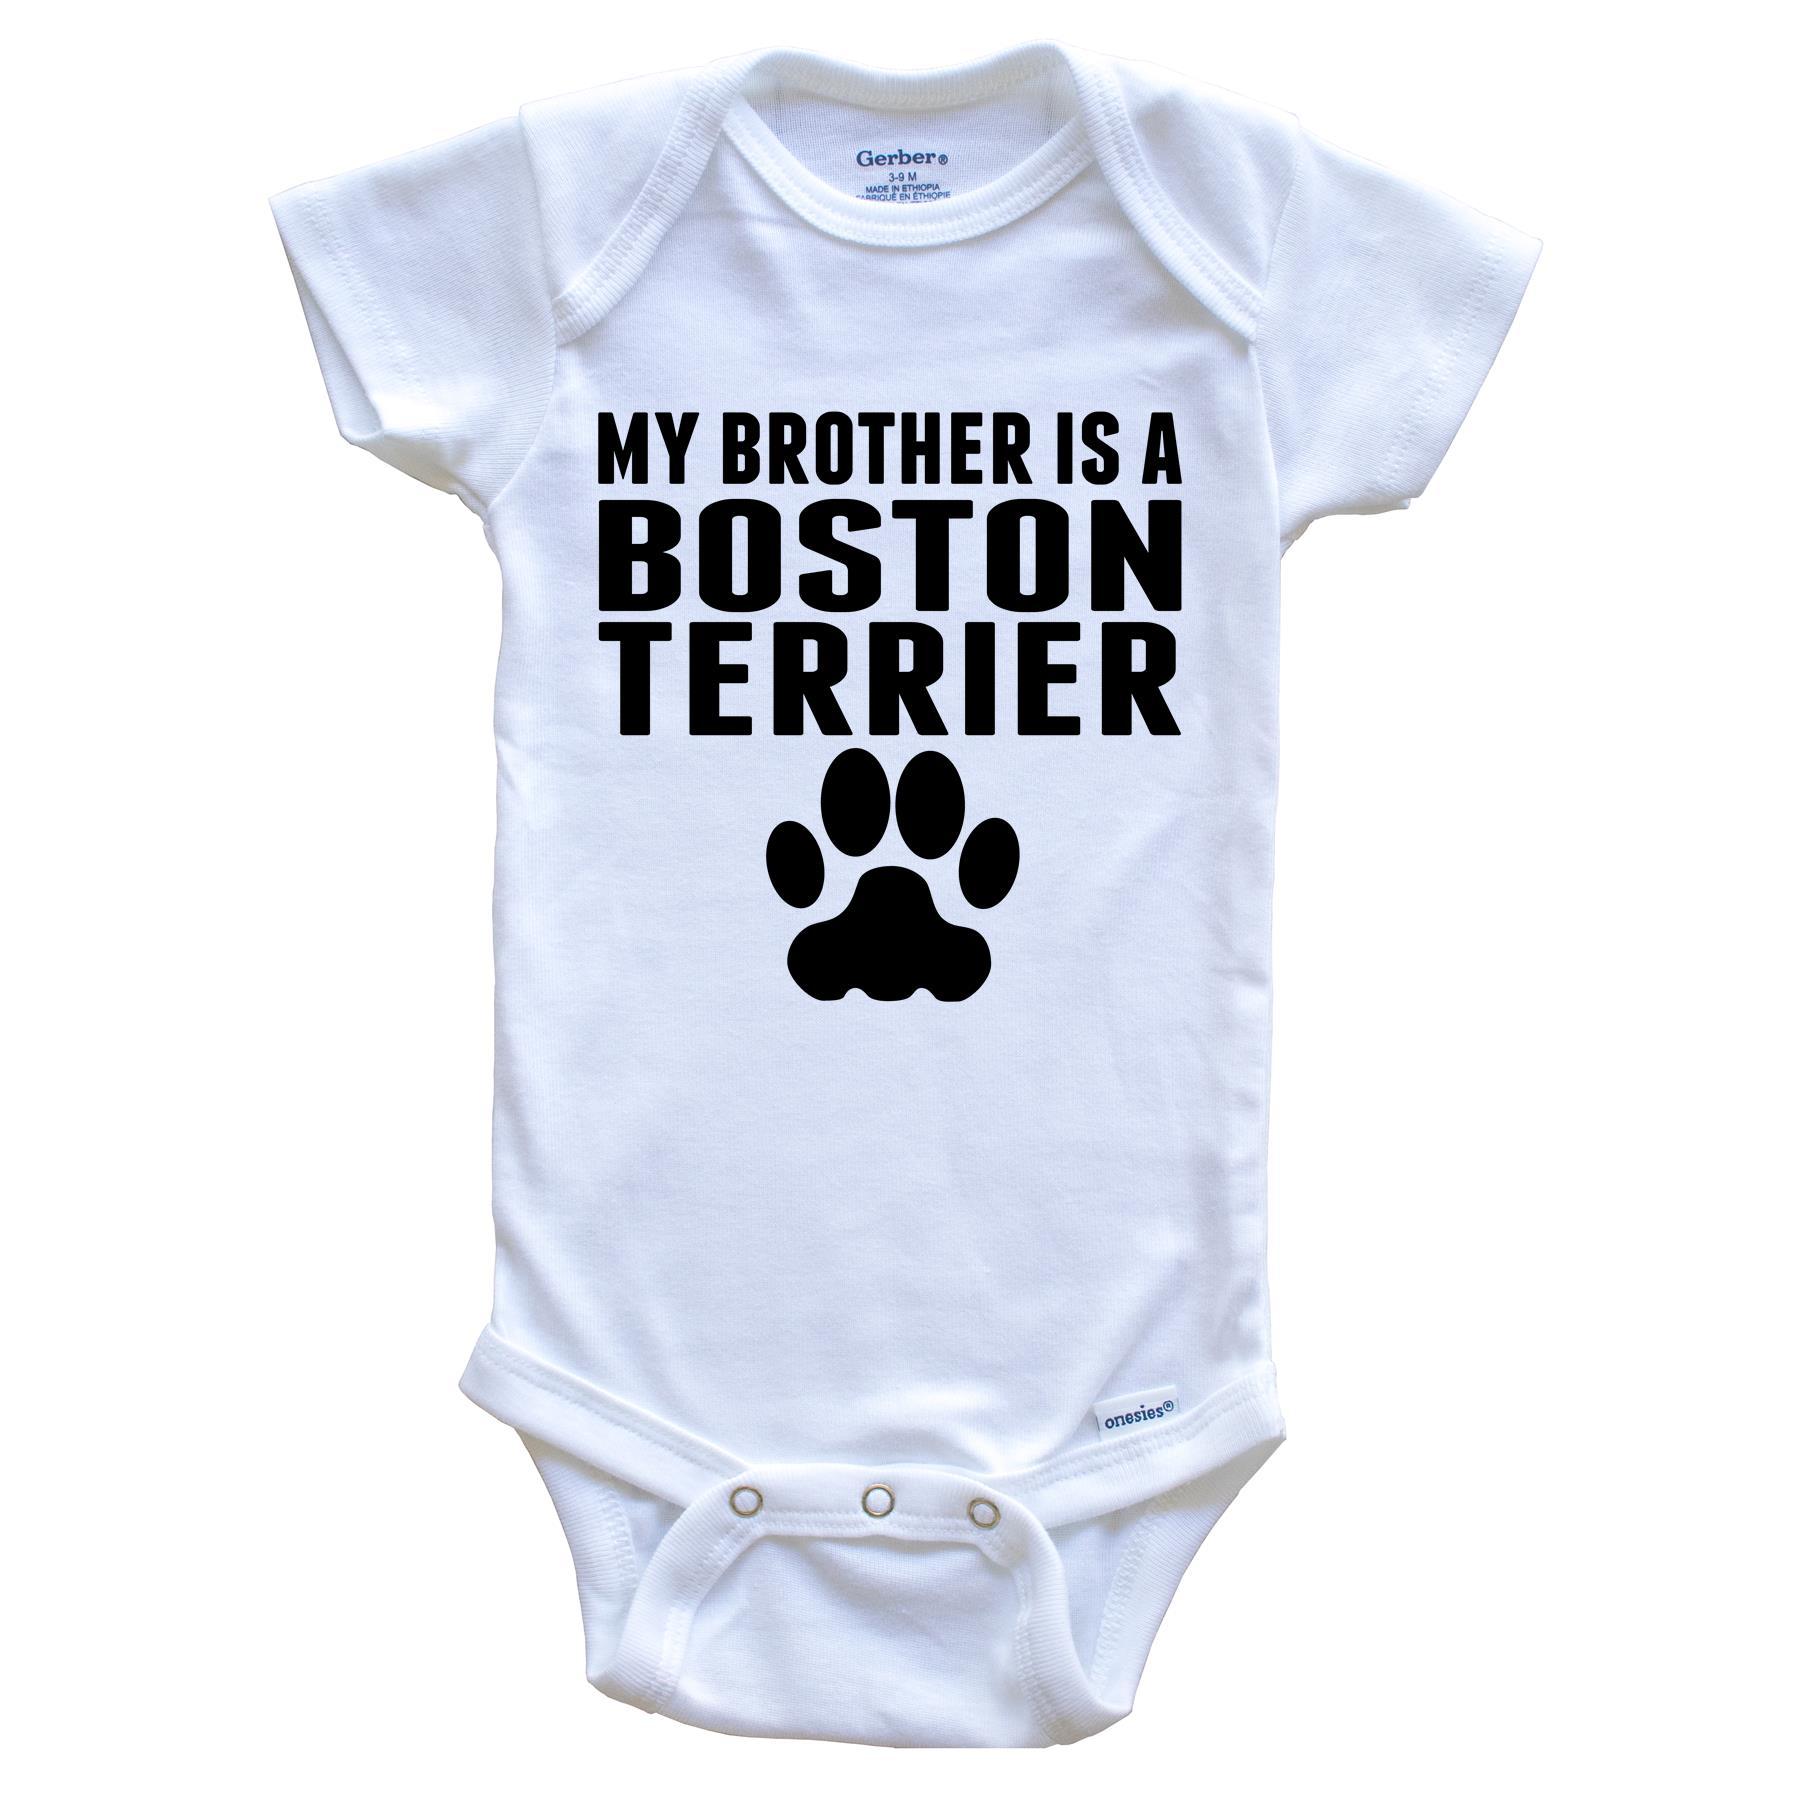 My Brother Is A Boston Terrier Baby Onesie